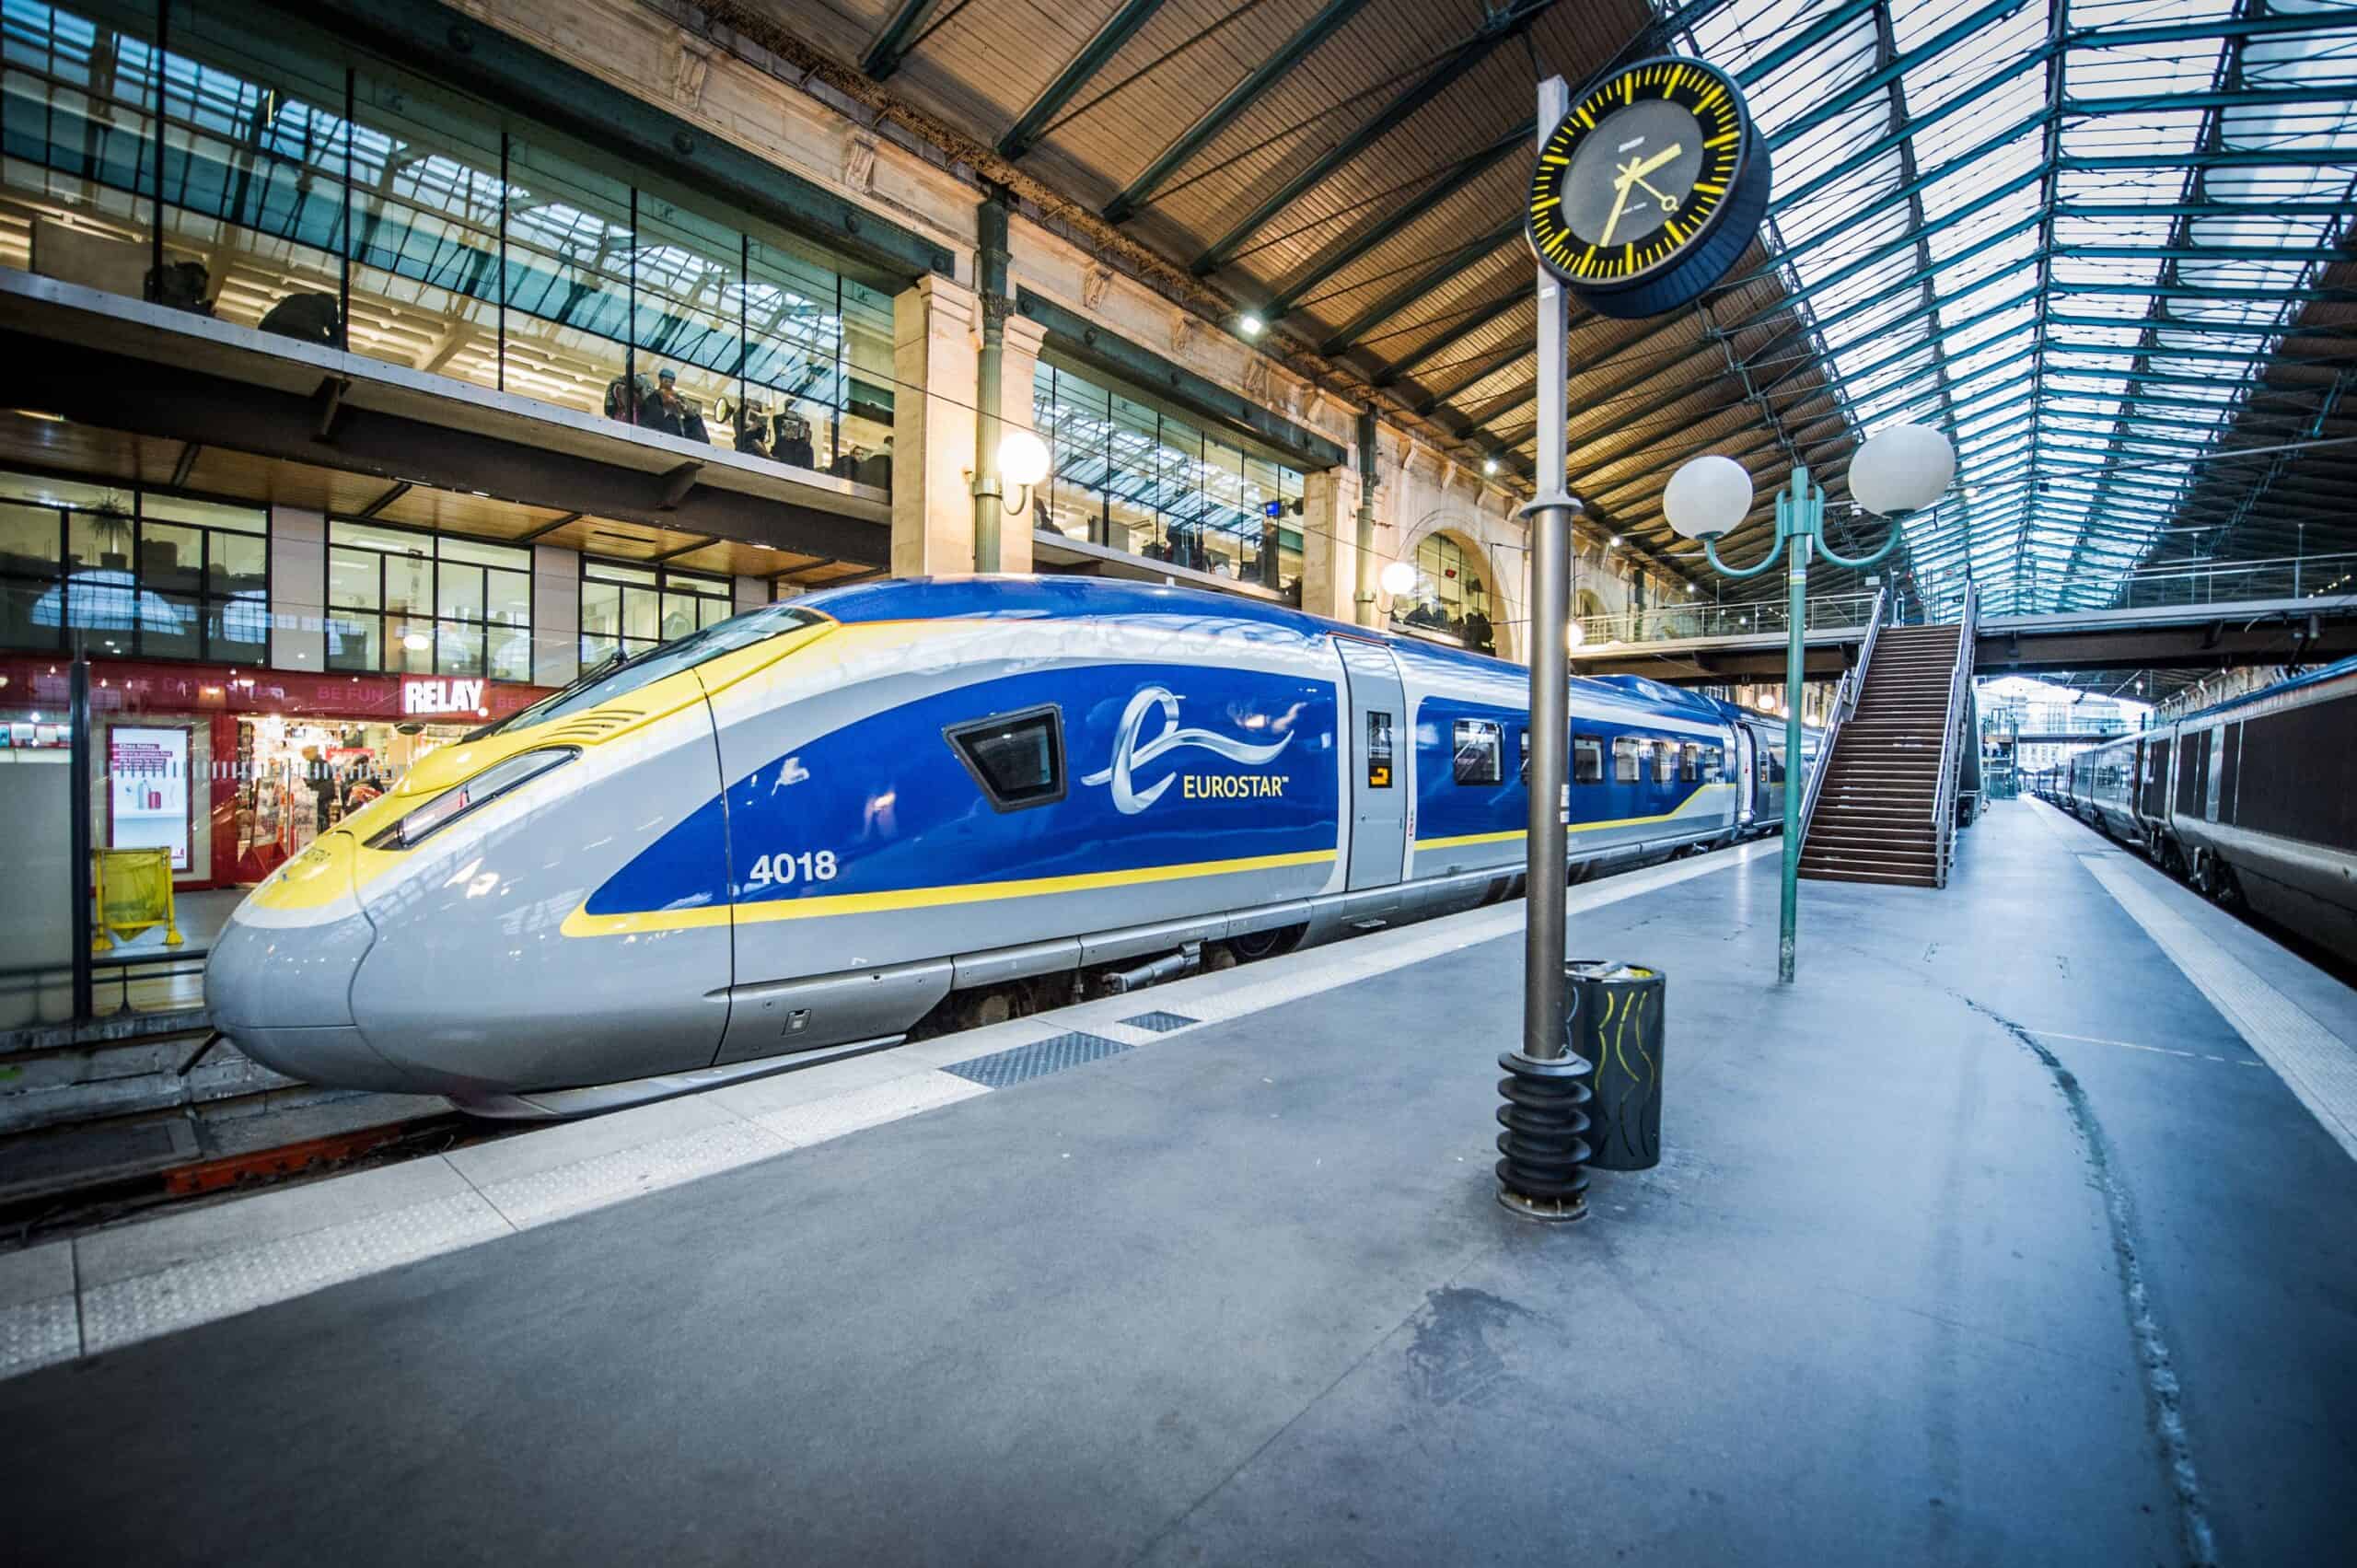 Eurostar could be forced to limit passenger numbers under post-Brexit plans